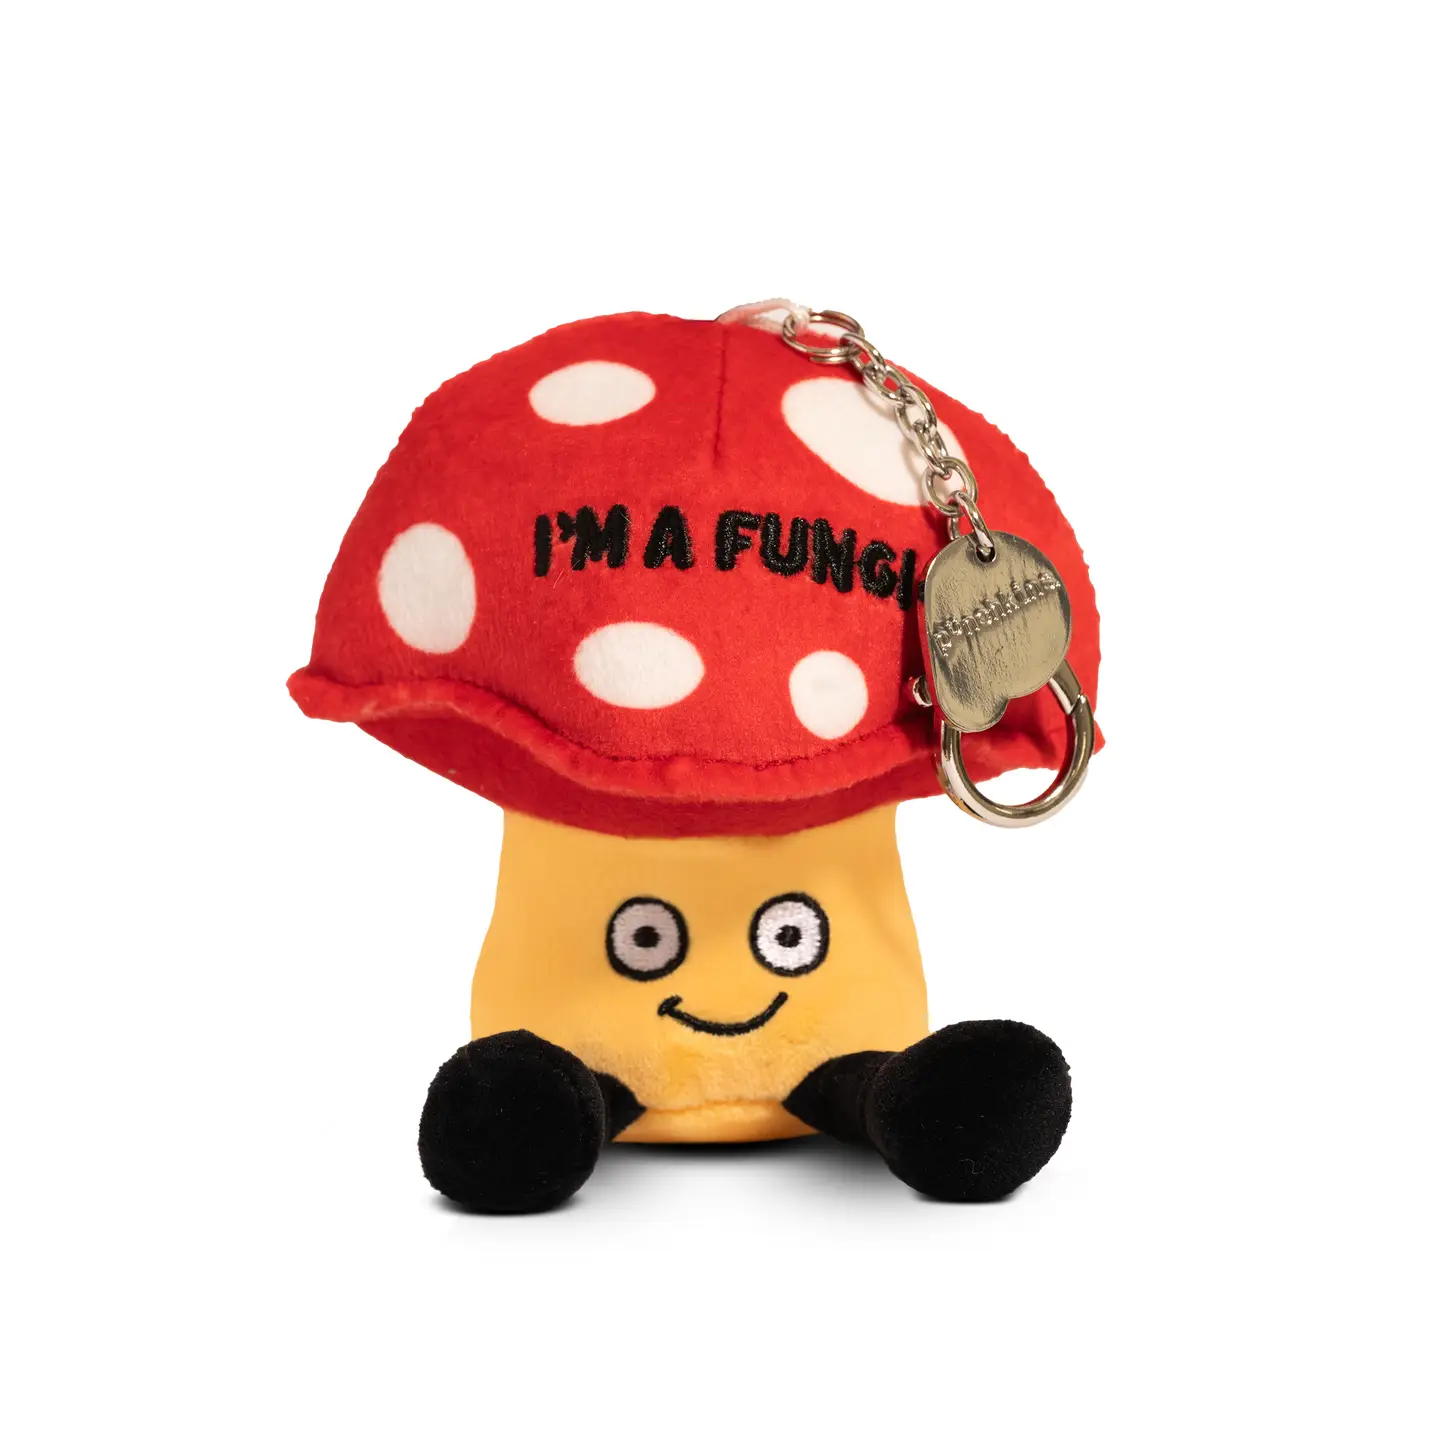 No cap, this may be the most fun charm we’ve made. He’s a fungi, and is always a good spore-t. His playful smile and dangly legs only add to his cuteness. He’s the perfect little gift for your best bud.